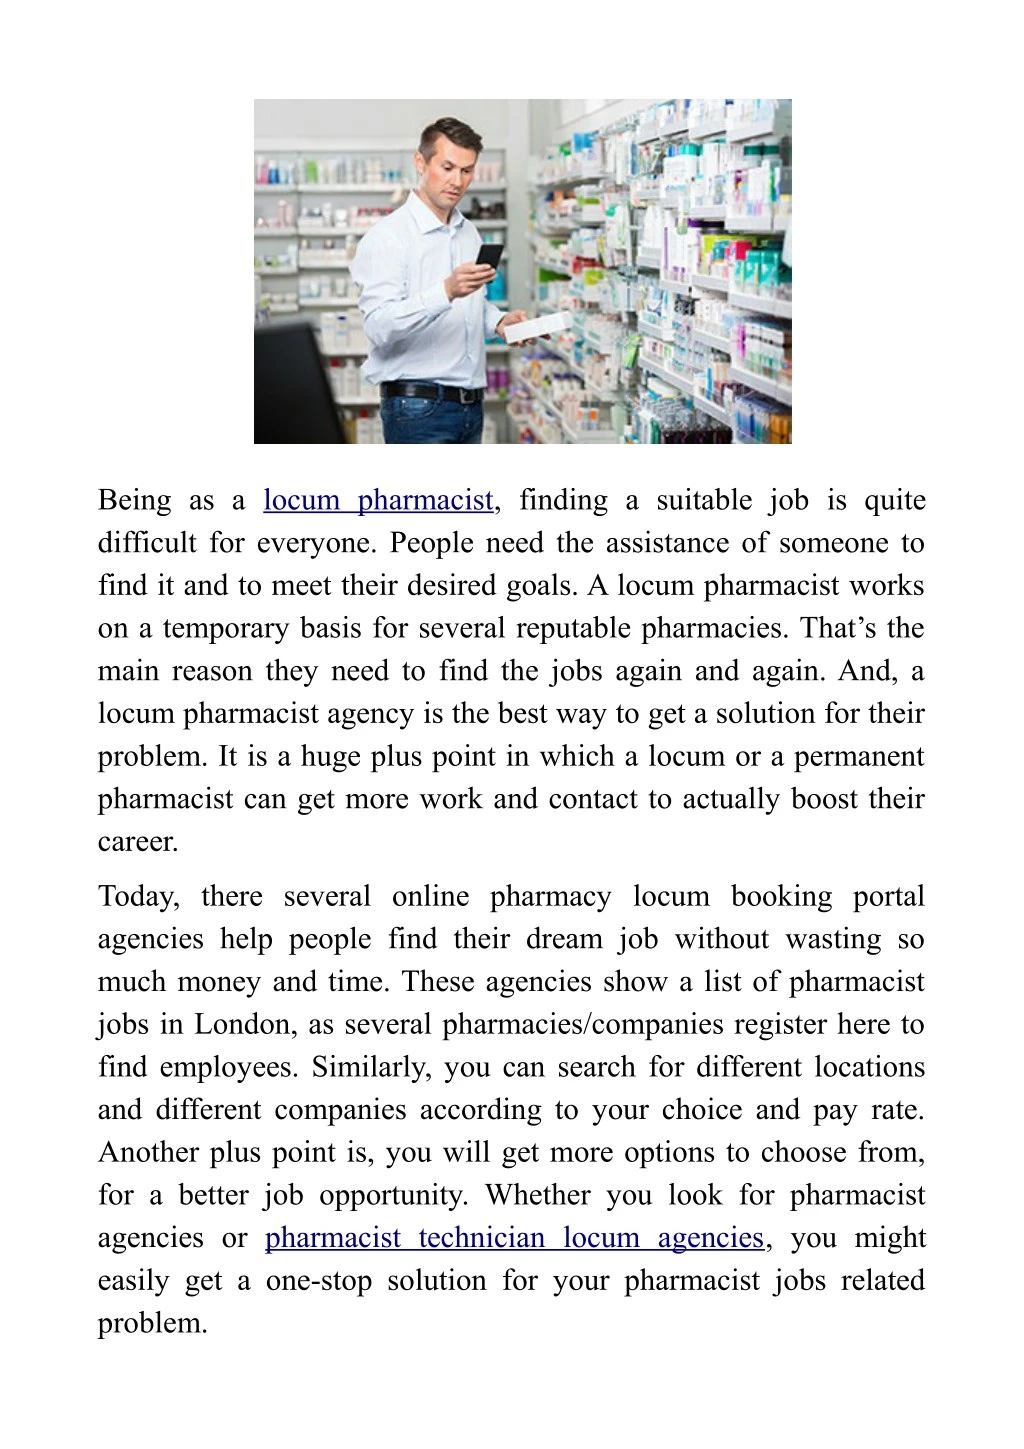 being as a locum pharmacist finding a suitable